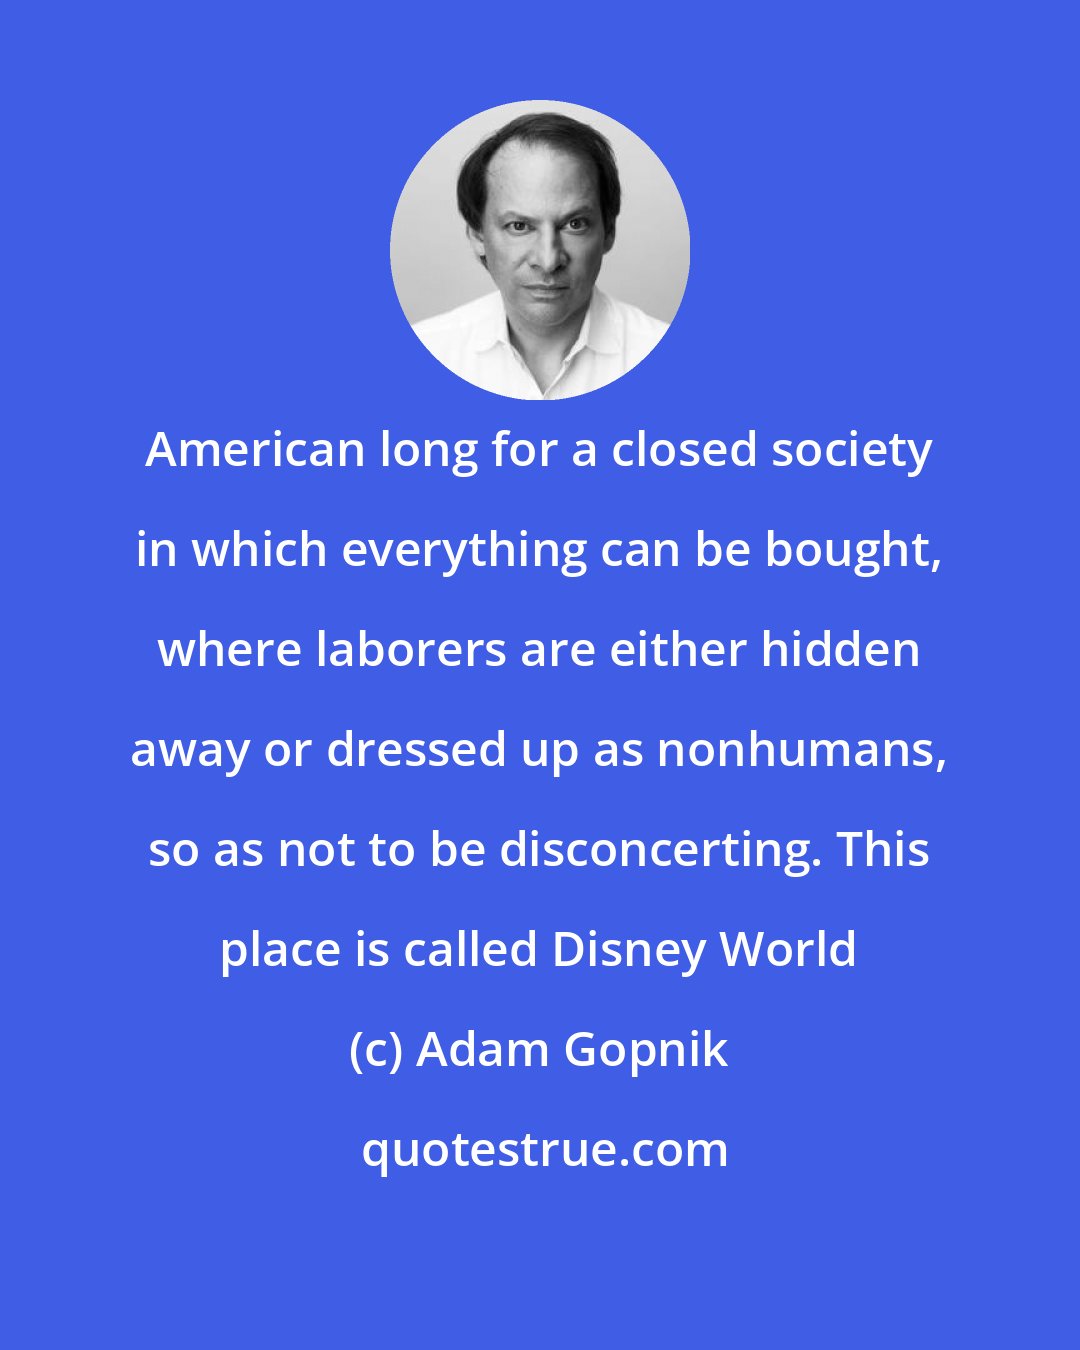 Adam Gopnik: American long for a closed society in which everything can be bought, where laborers are either hidden away or dressed up as nonhumans, so as not to be disconcerting. This place is called Disney World